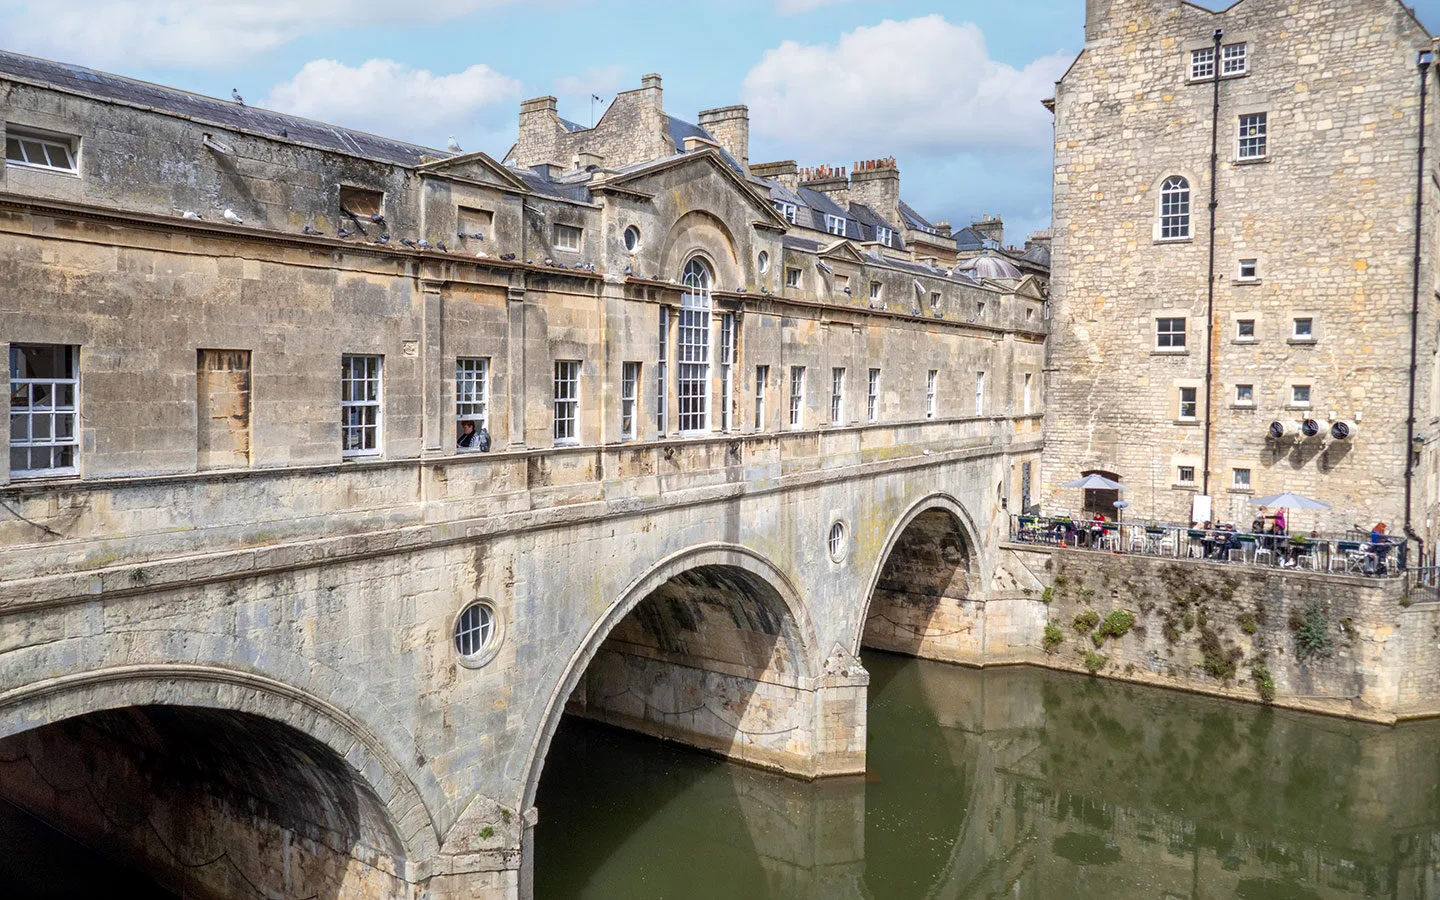 The covered Pulteney Bridge in Bath